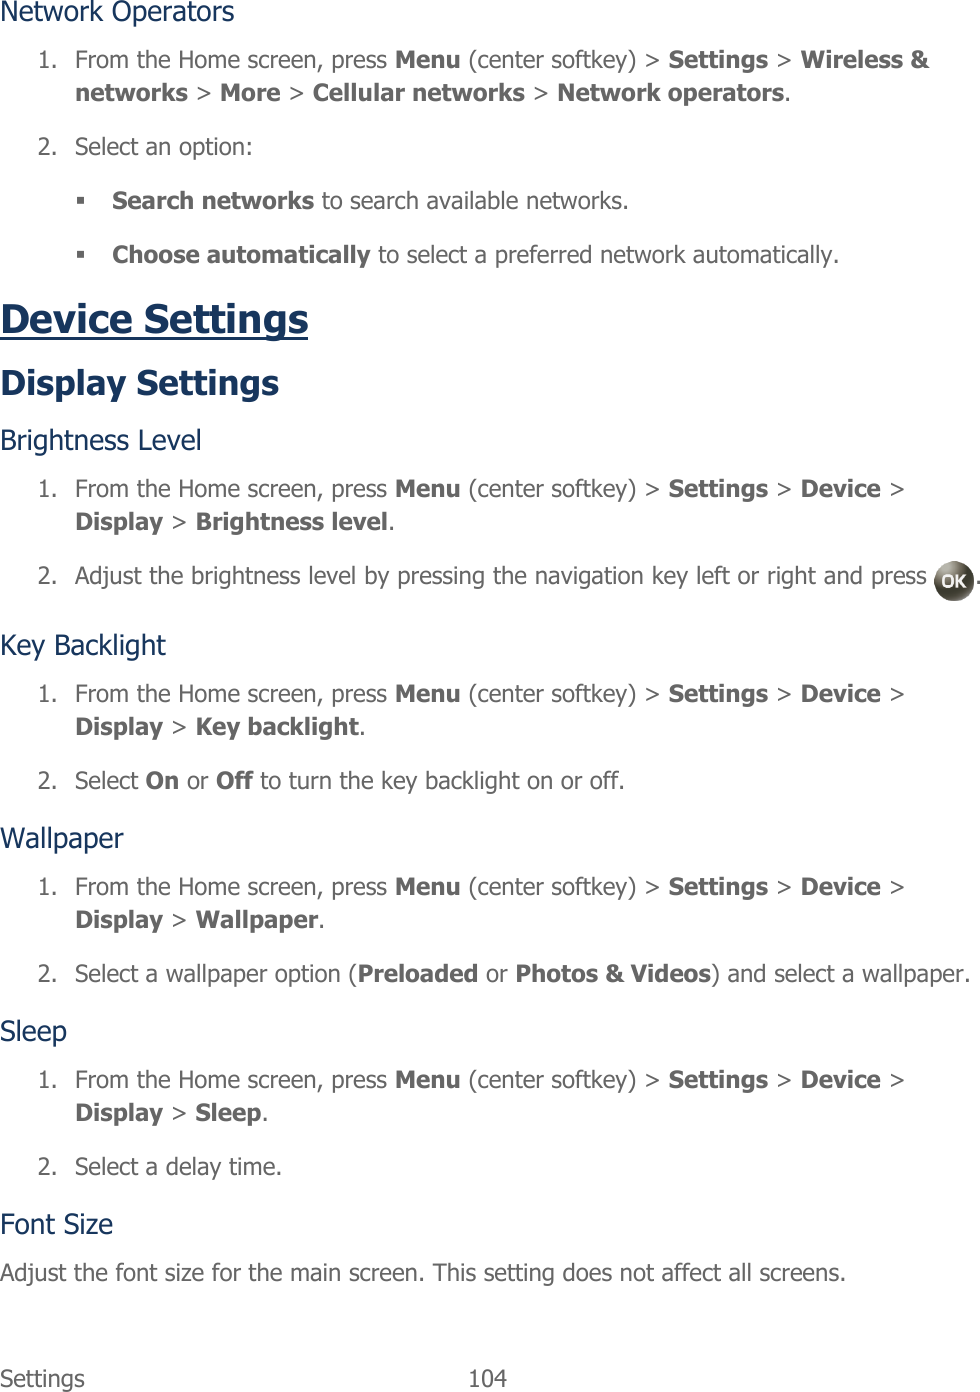  Settings  104   Network Operators 1. From the Home screen, press Menu (center softkey) &gt; Settings &gt; Wireless &amp; networks &gt; More &gt; Cellular networks &gt; Network operators. 2. Select an option:  Search networks to search available networks.  Choose automatically to select a preferred network automatically. Device Settings Display Settings Brightness Level 1. From the Home screen, press Menu (center softkey) &gt; Settings &gt; Device &gt; Display &gt; Brightness level. 2. Adjust the brightness level by pressing the navigation key left or right and press  . Key Backlight 1. From the Home screen, press Menu (center softkey) &gt; Settings &gt; Device &gt; Display &gt; Key backlight. 2. Select On or Off to turn the key backlight on or off. Wallpaper 1. From the Home screen, press Menu (center softkey) &gt; Settings &gt; Device &gt; Display &gt; Wallpaper. 2. Select a wallpaper option (Preloaded or Photos &amp; Videos) and select a wallpaper. Sleep 1. From the Home screen, press Menu (center softkey) &gt; Settings &gt; Device &gt; Display &gt; Sleep. 2. Select a delay time. Font Size Adjust the font size for the main screen. This setting does not affect all screens. 